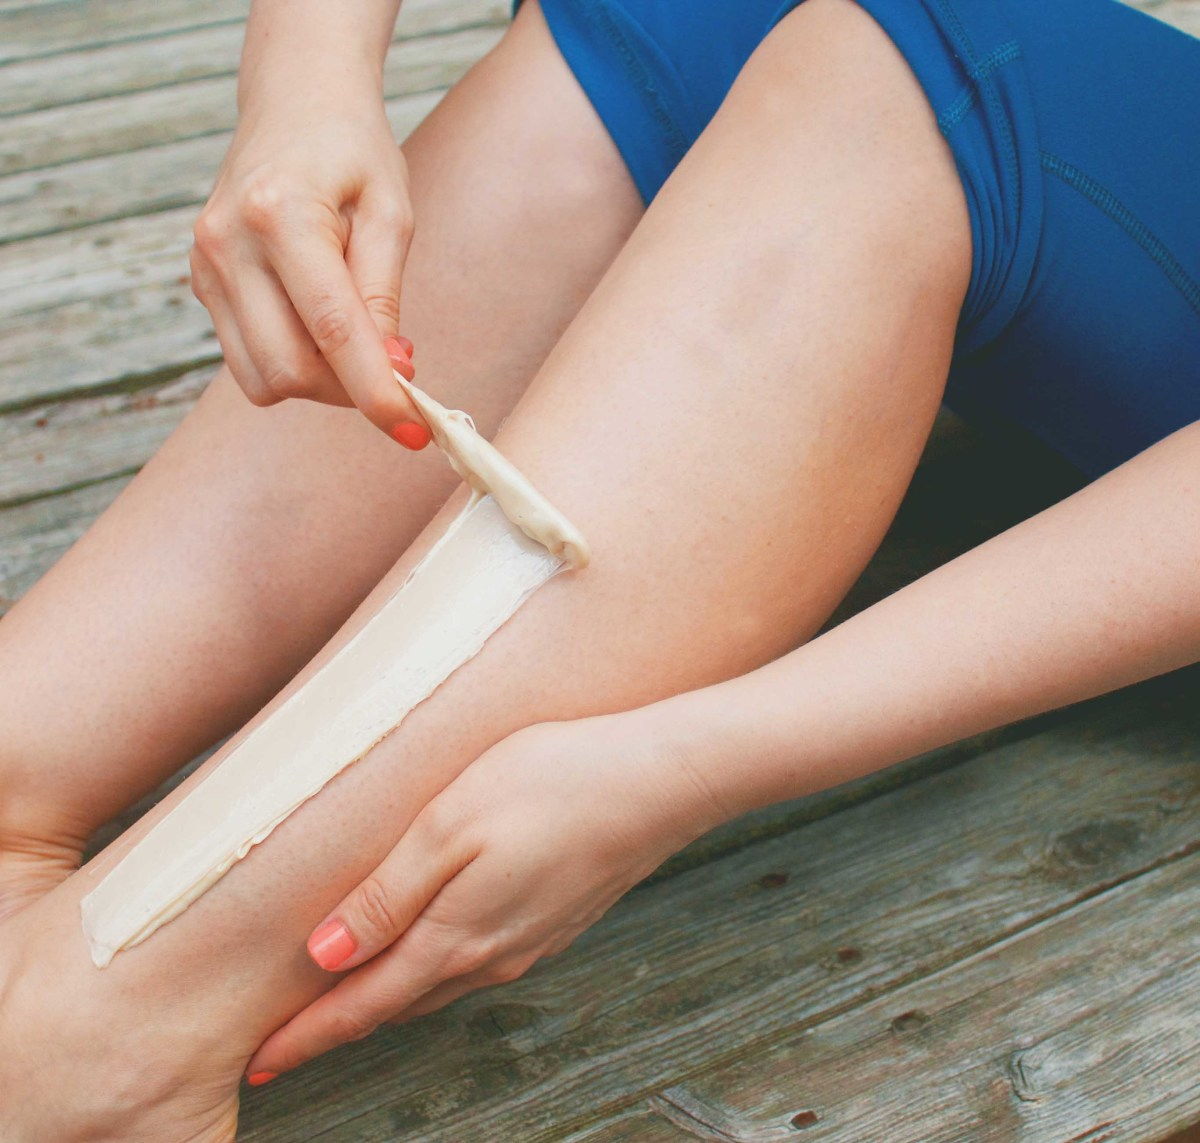 The Best No-Strip Wax For Easy Hair Removal At Home